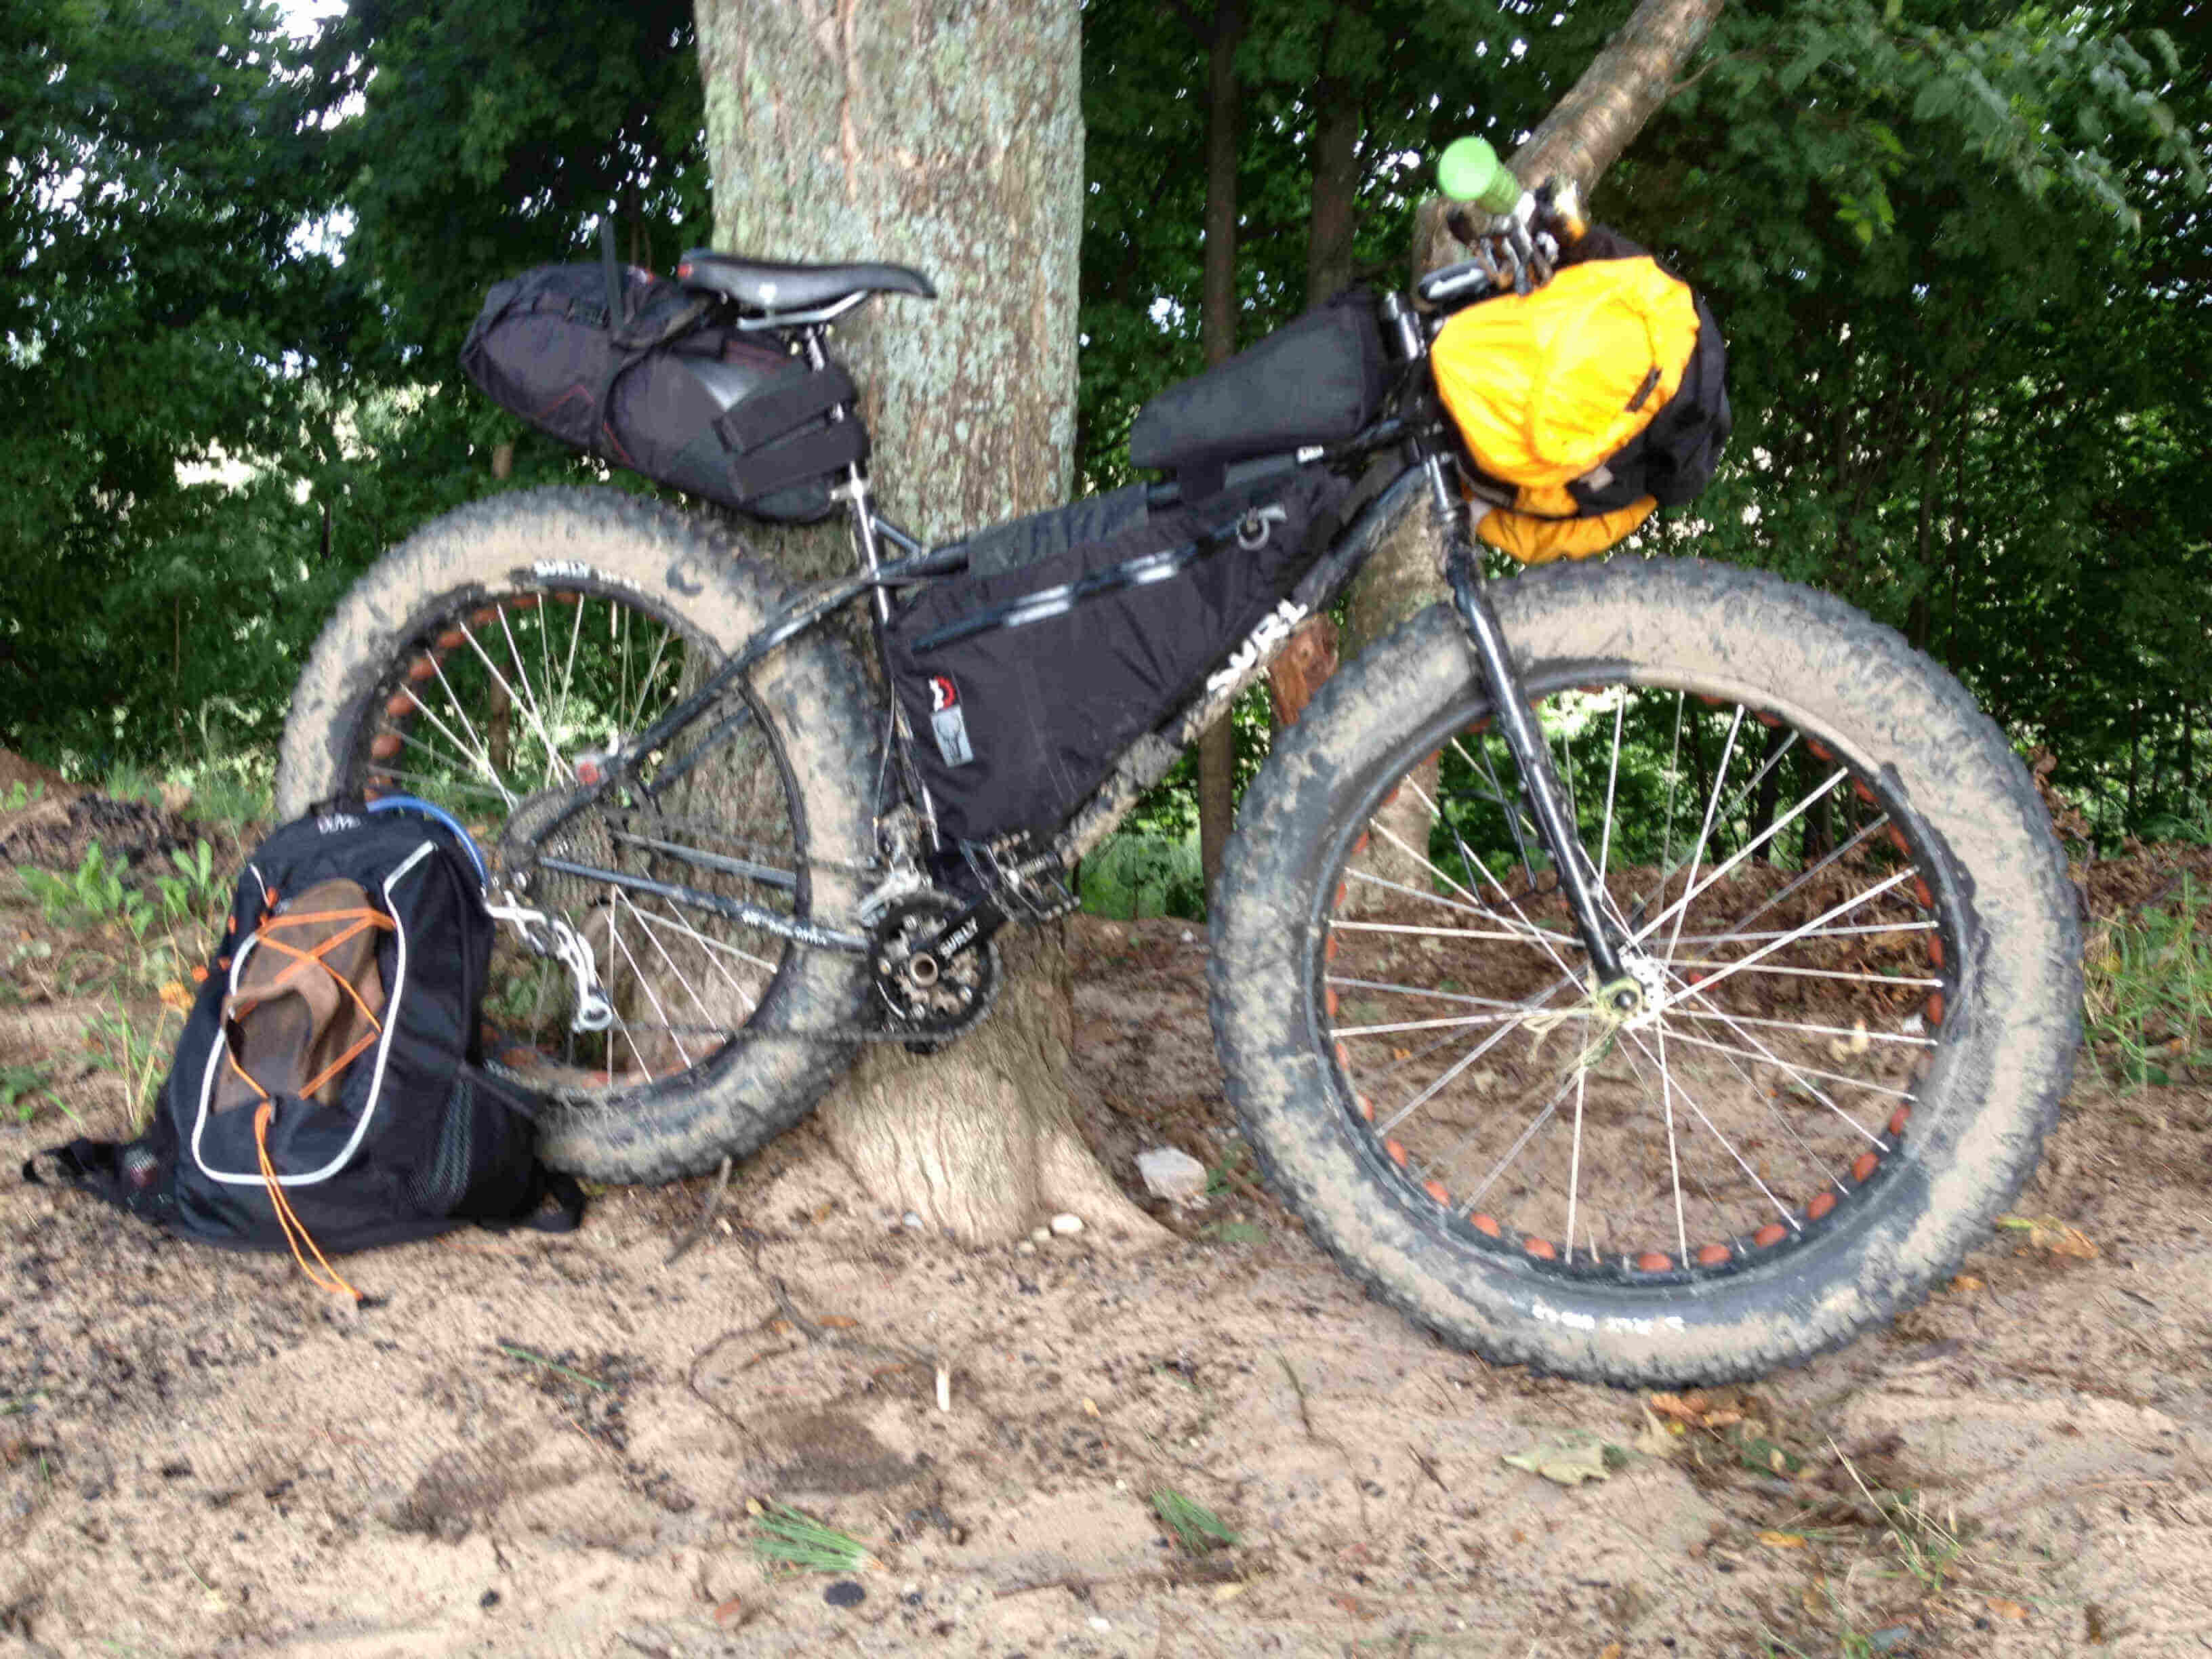 Right side view of a Surly Moonlander fat bike with gear, leaning against a tree on dirt ground, with trees behind it